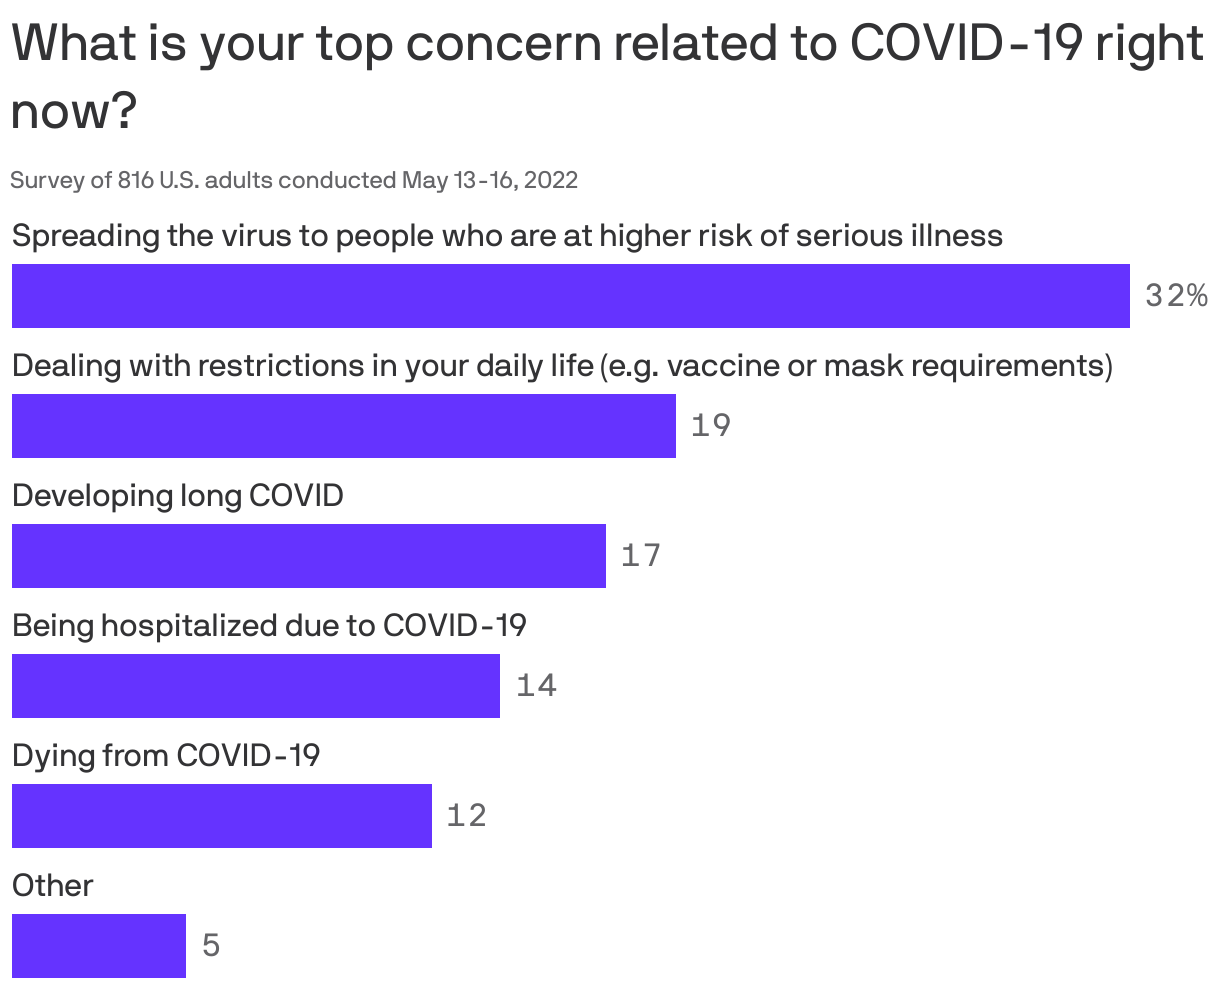 What is your top concern related to COVID-19 right now?